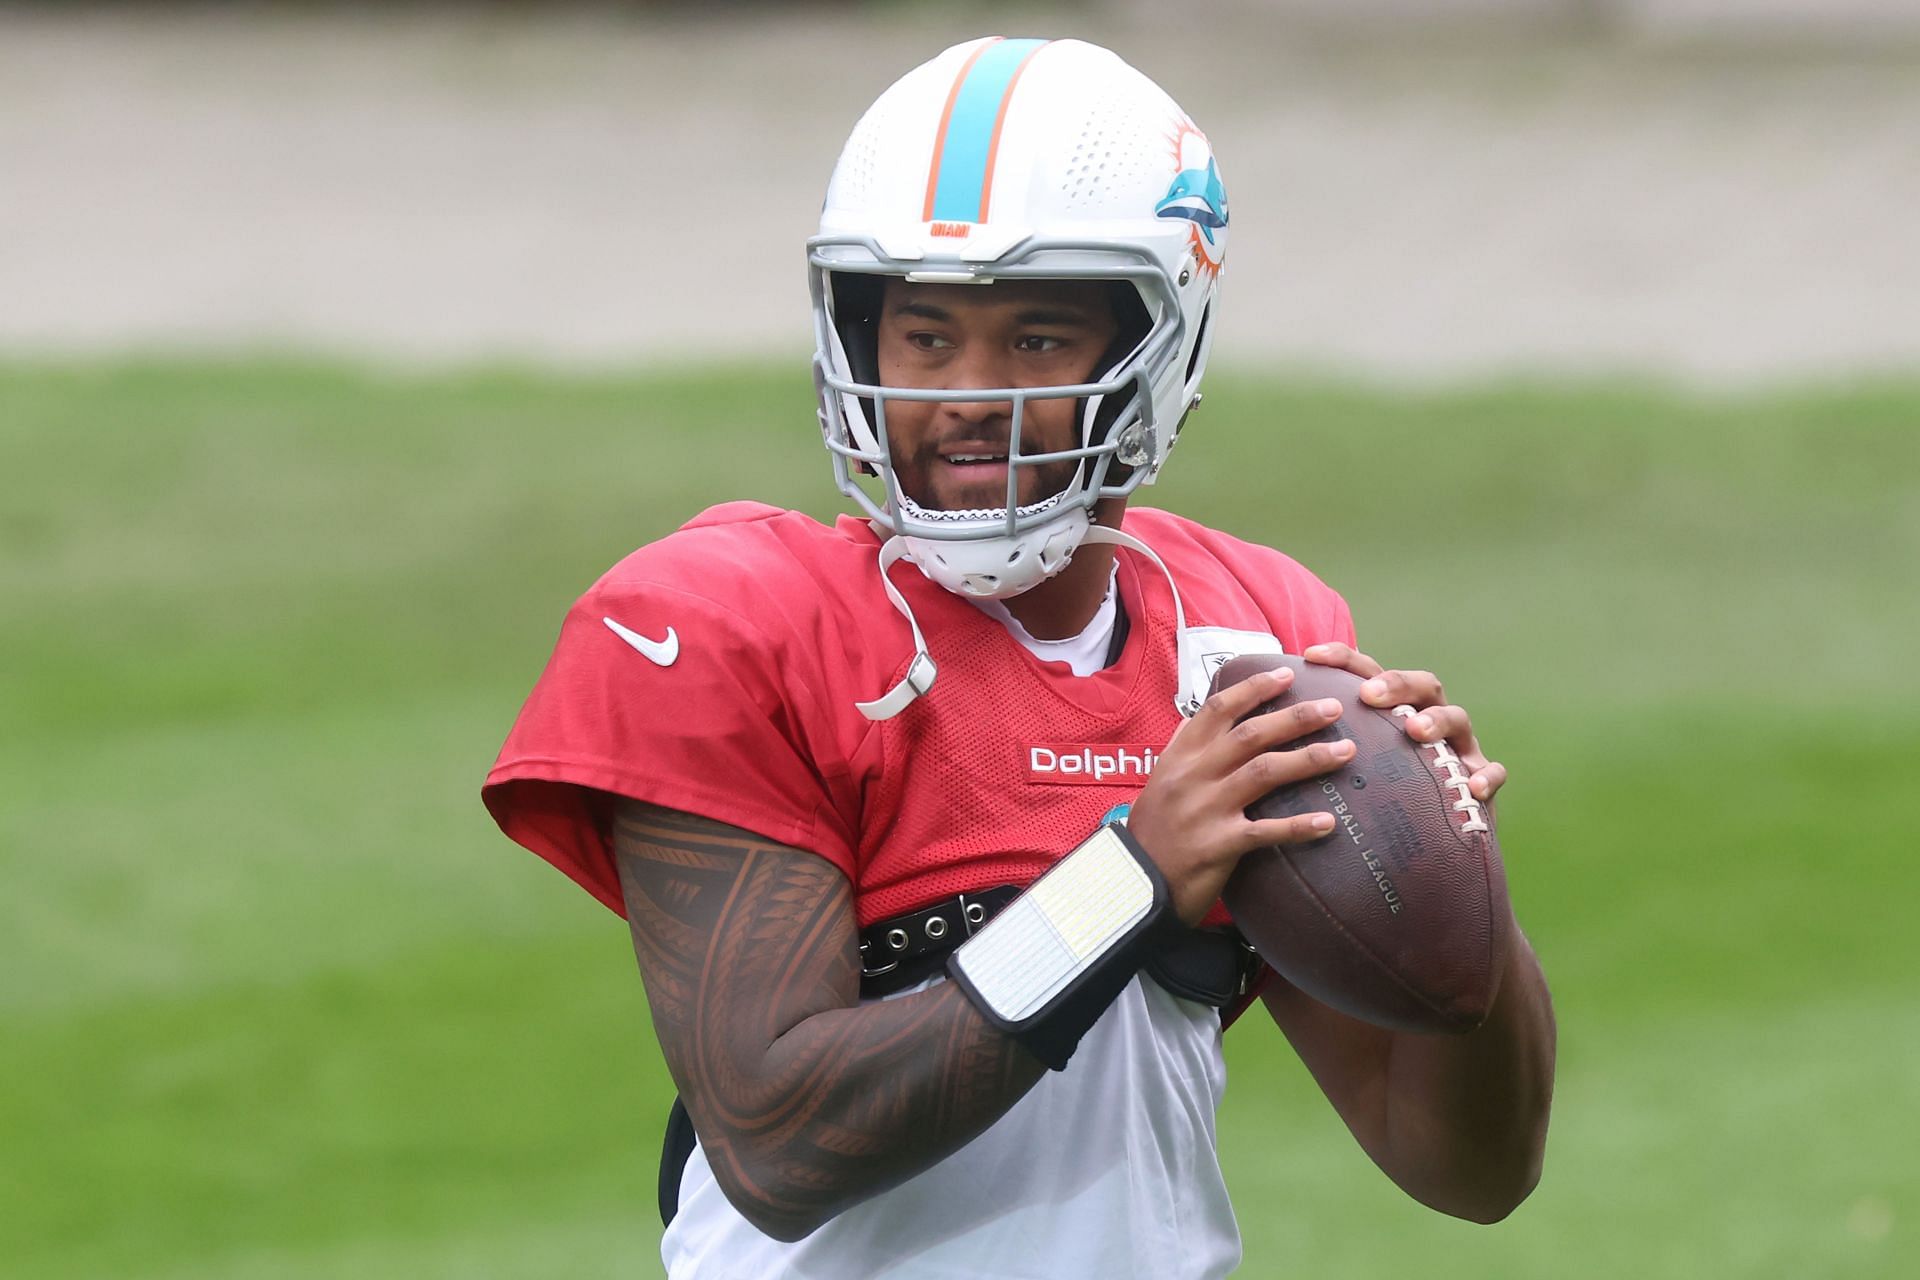 Miami Dolphins Training Session